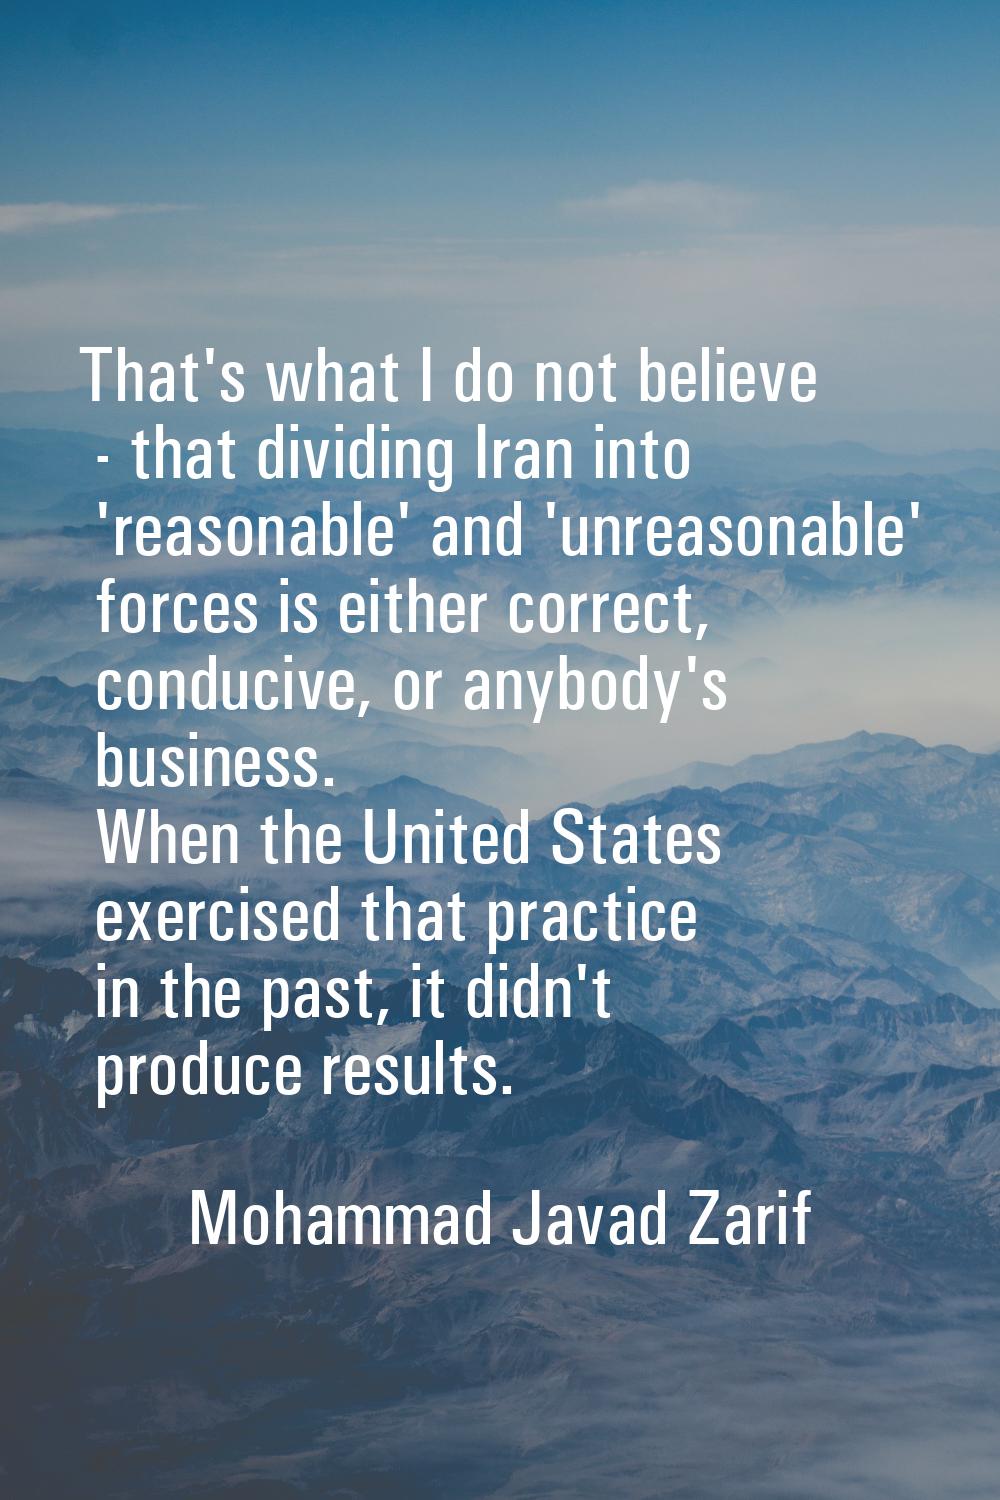 That's what I do not believe - that dividing Iran into 'reasonable' and 'unreasonable' forces is ei